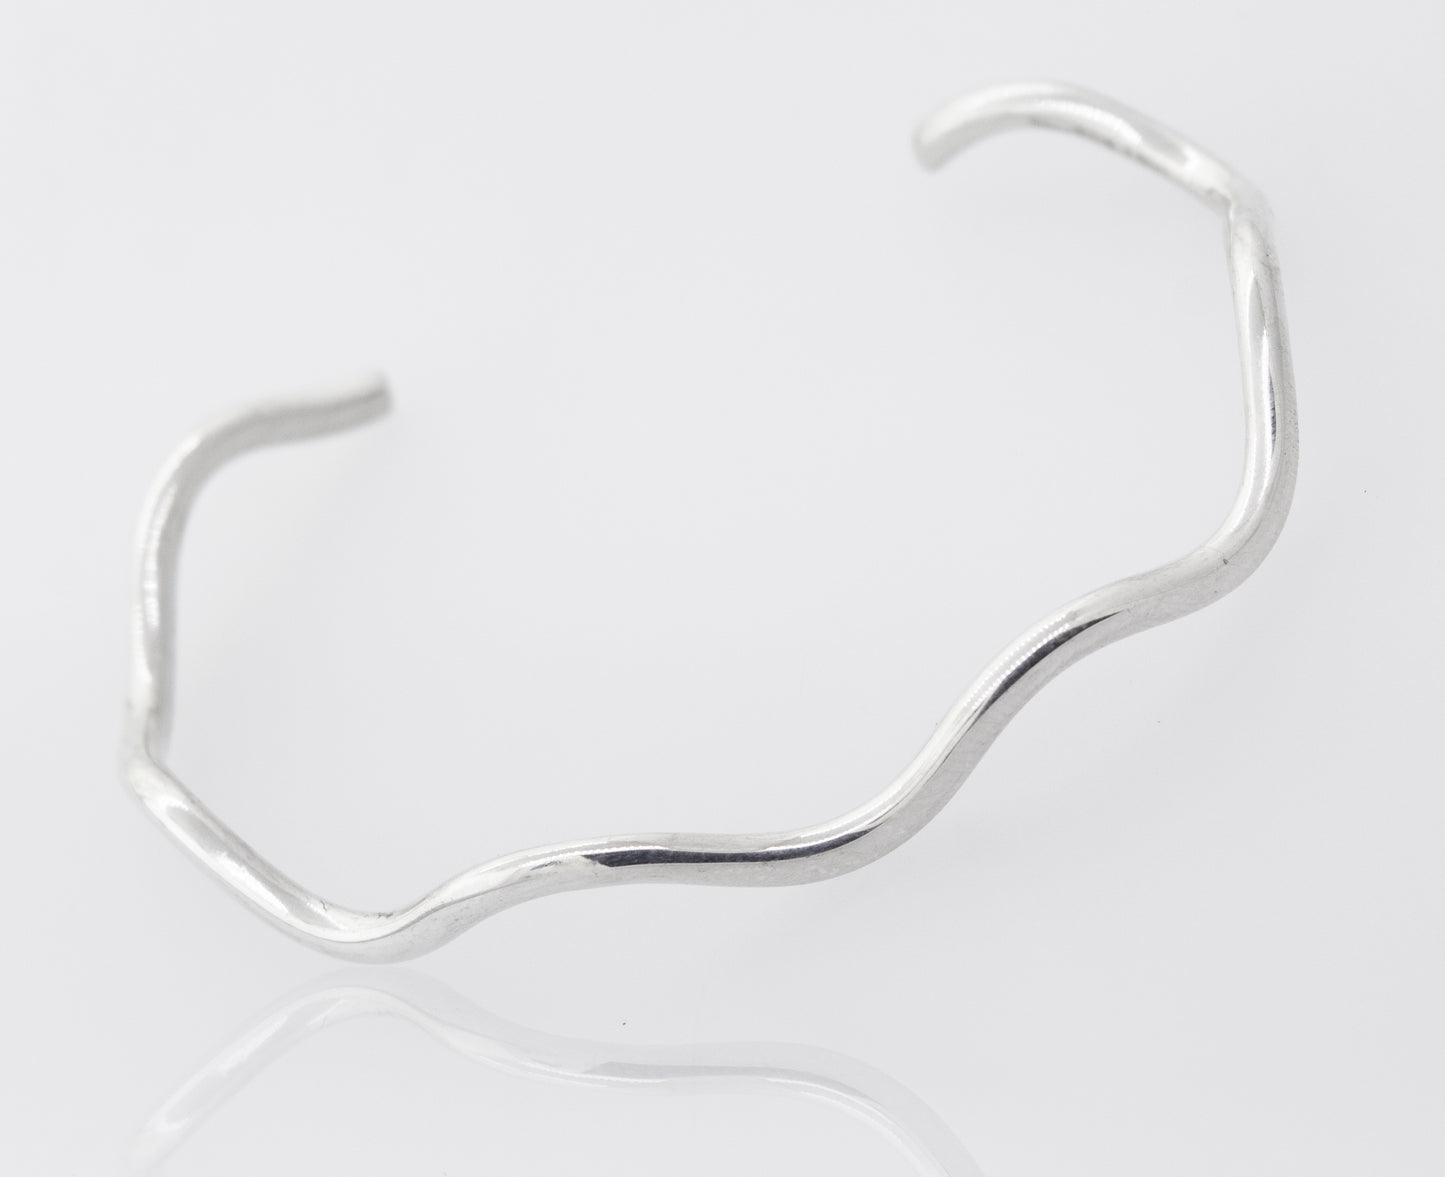 
                  
                    A Native American Handmade Silver Wavy Cuff by Super Silver shines bright on a white surface.
                  
                